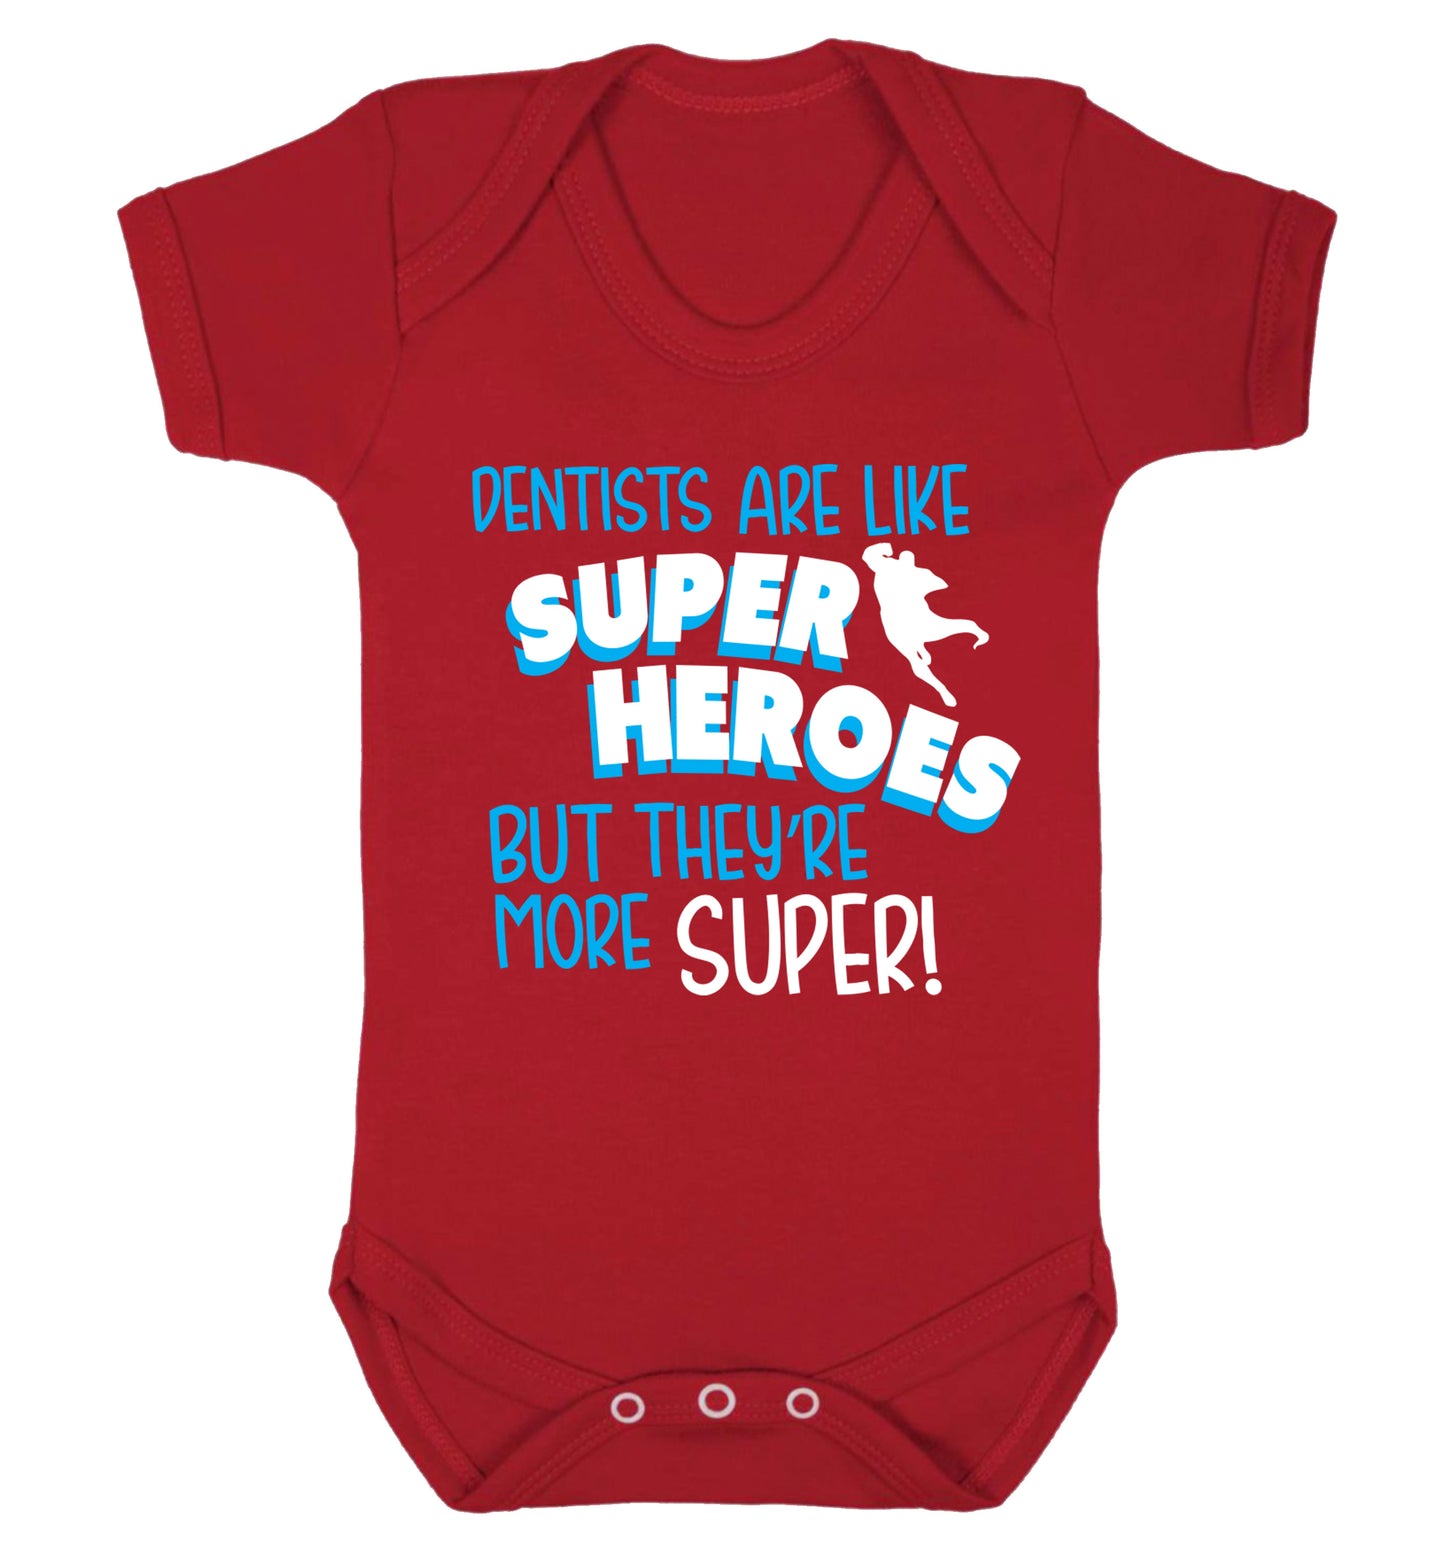 Dentists are like superheros but they're more super Baby Vest red 18-24 months